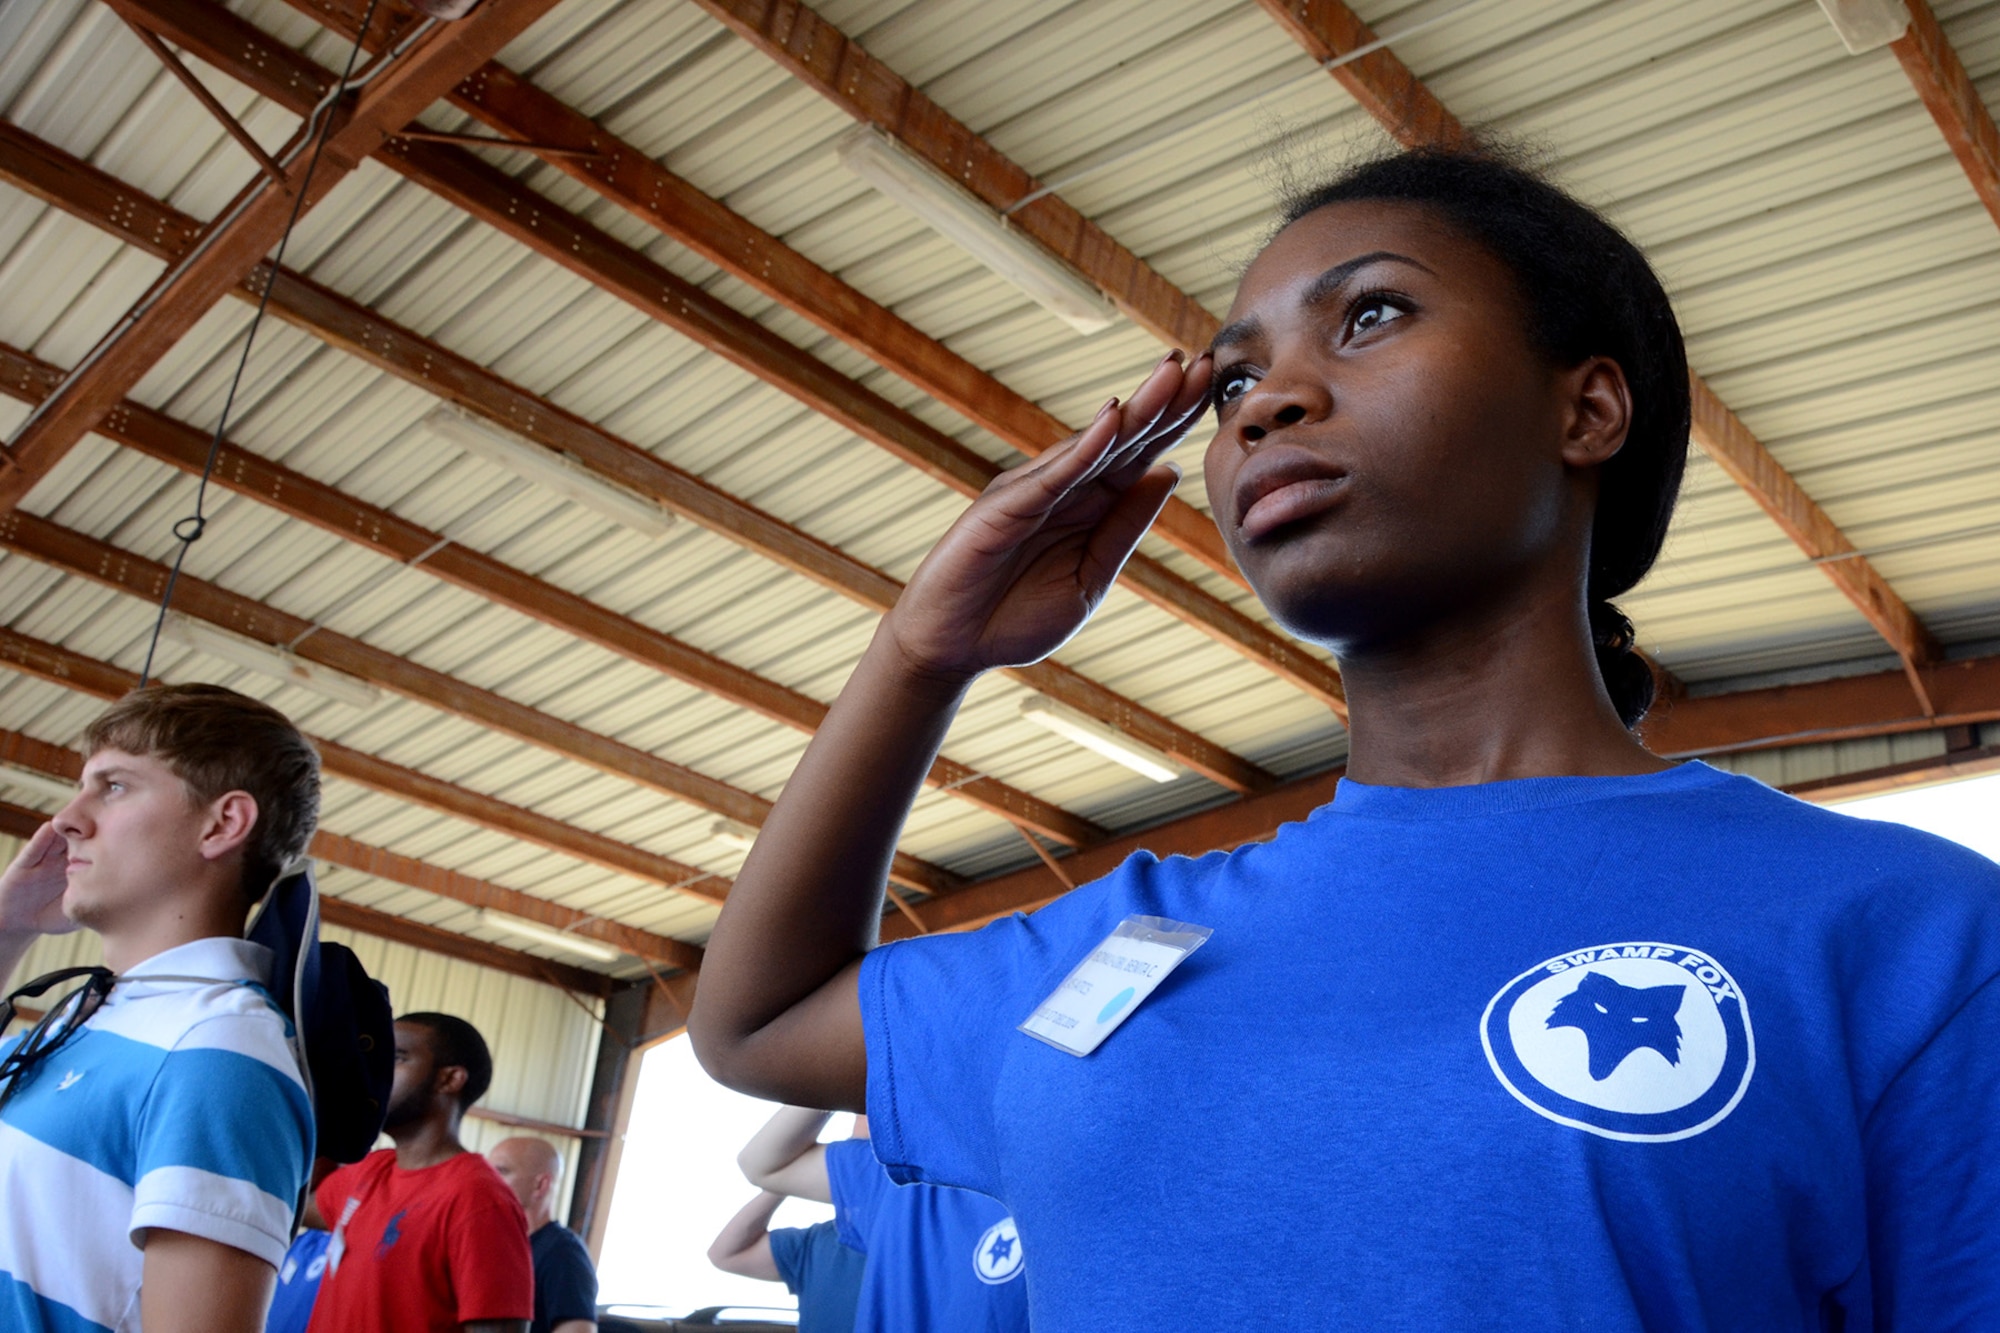 U.S. Air Force Airman Benita Mbonu-Obi, assigned to the 169th Student Flight, renders a salute at McEntire Joint National Guard Base, S.C., June 13, 2015.  The trainees were taught several facing and drill movements in order to prepare them for Basic Military Training. (U.S. National Guard photo by Amn Megan Floyd/Released)